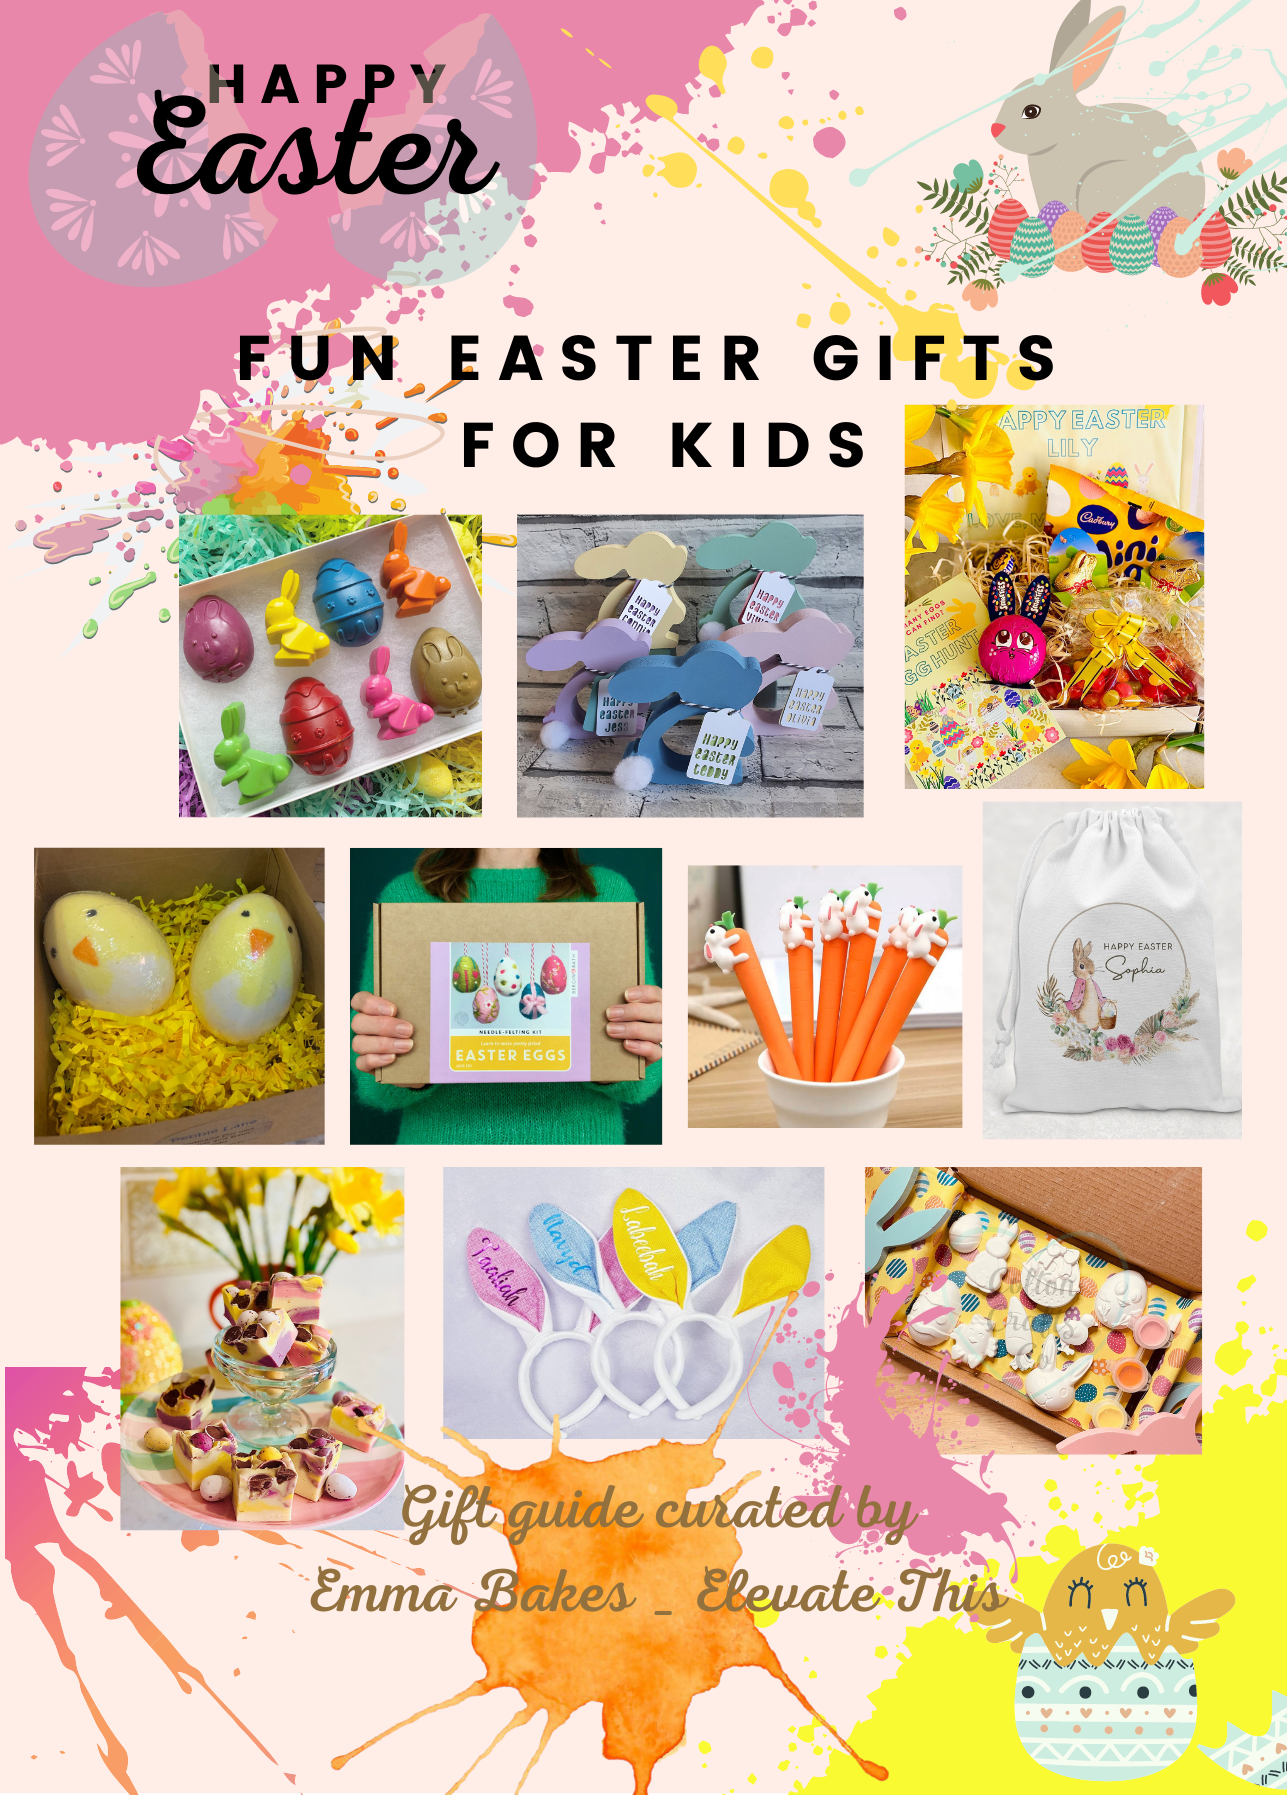 Fun Easter gifts for kids - a gift guide full of ideas to keep the kids happy and engaged this Easter